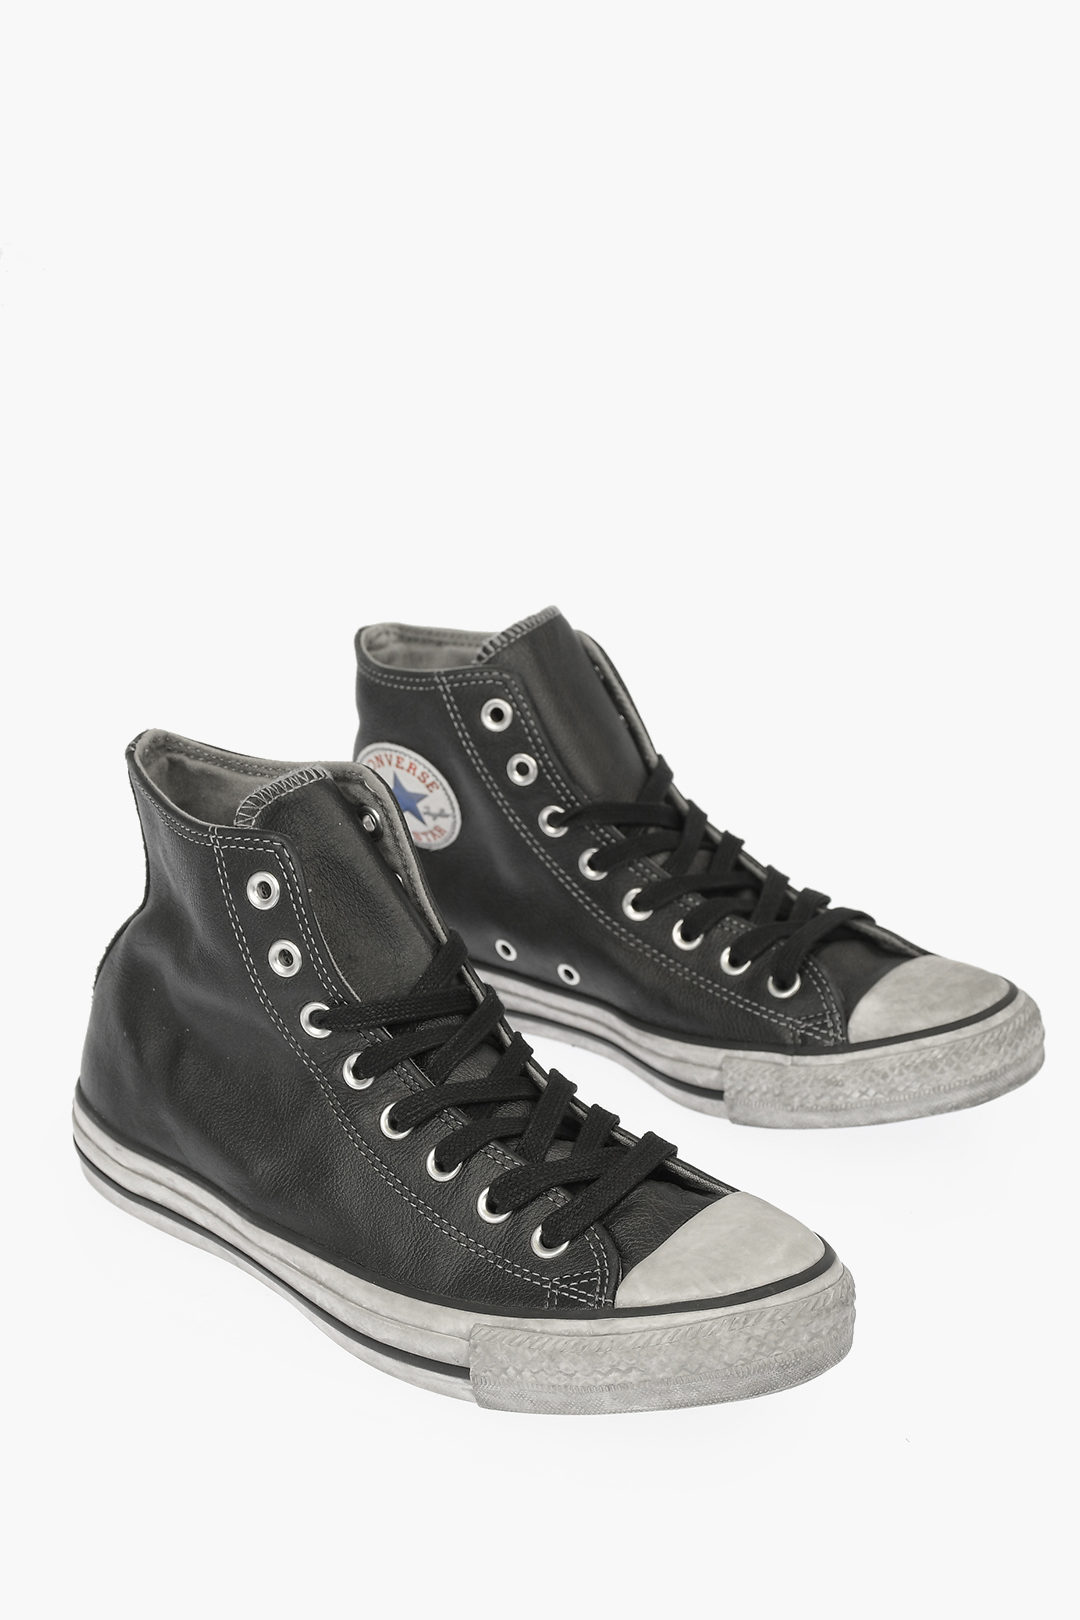 Converse Leather Sneakers men - Glamood Outlet